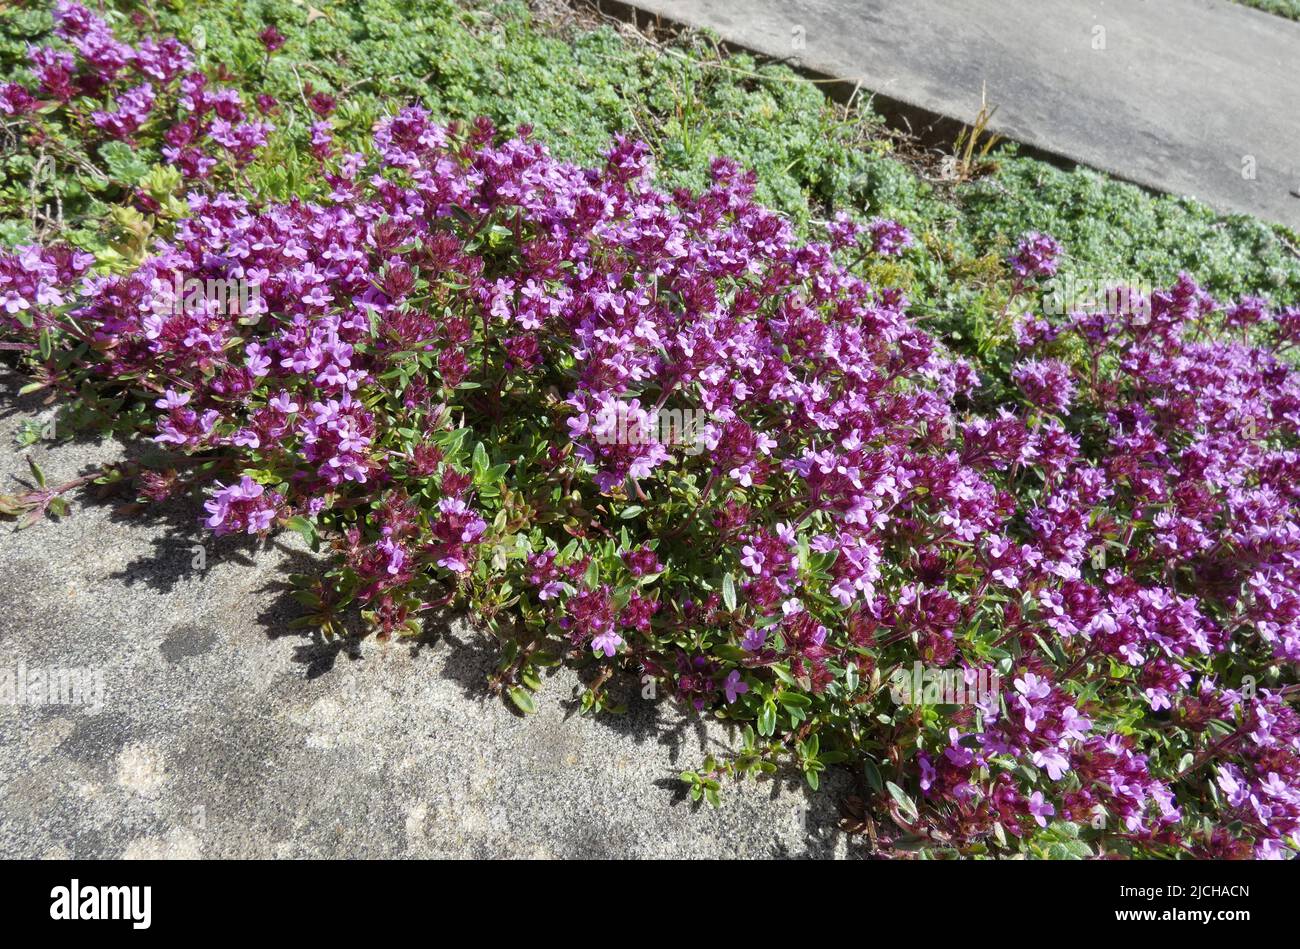 This creeping thyme is extreme low and early blooming. It's planted here between stone plates. Seen in Nordhorn, Germany Stock Photo